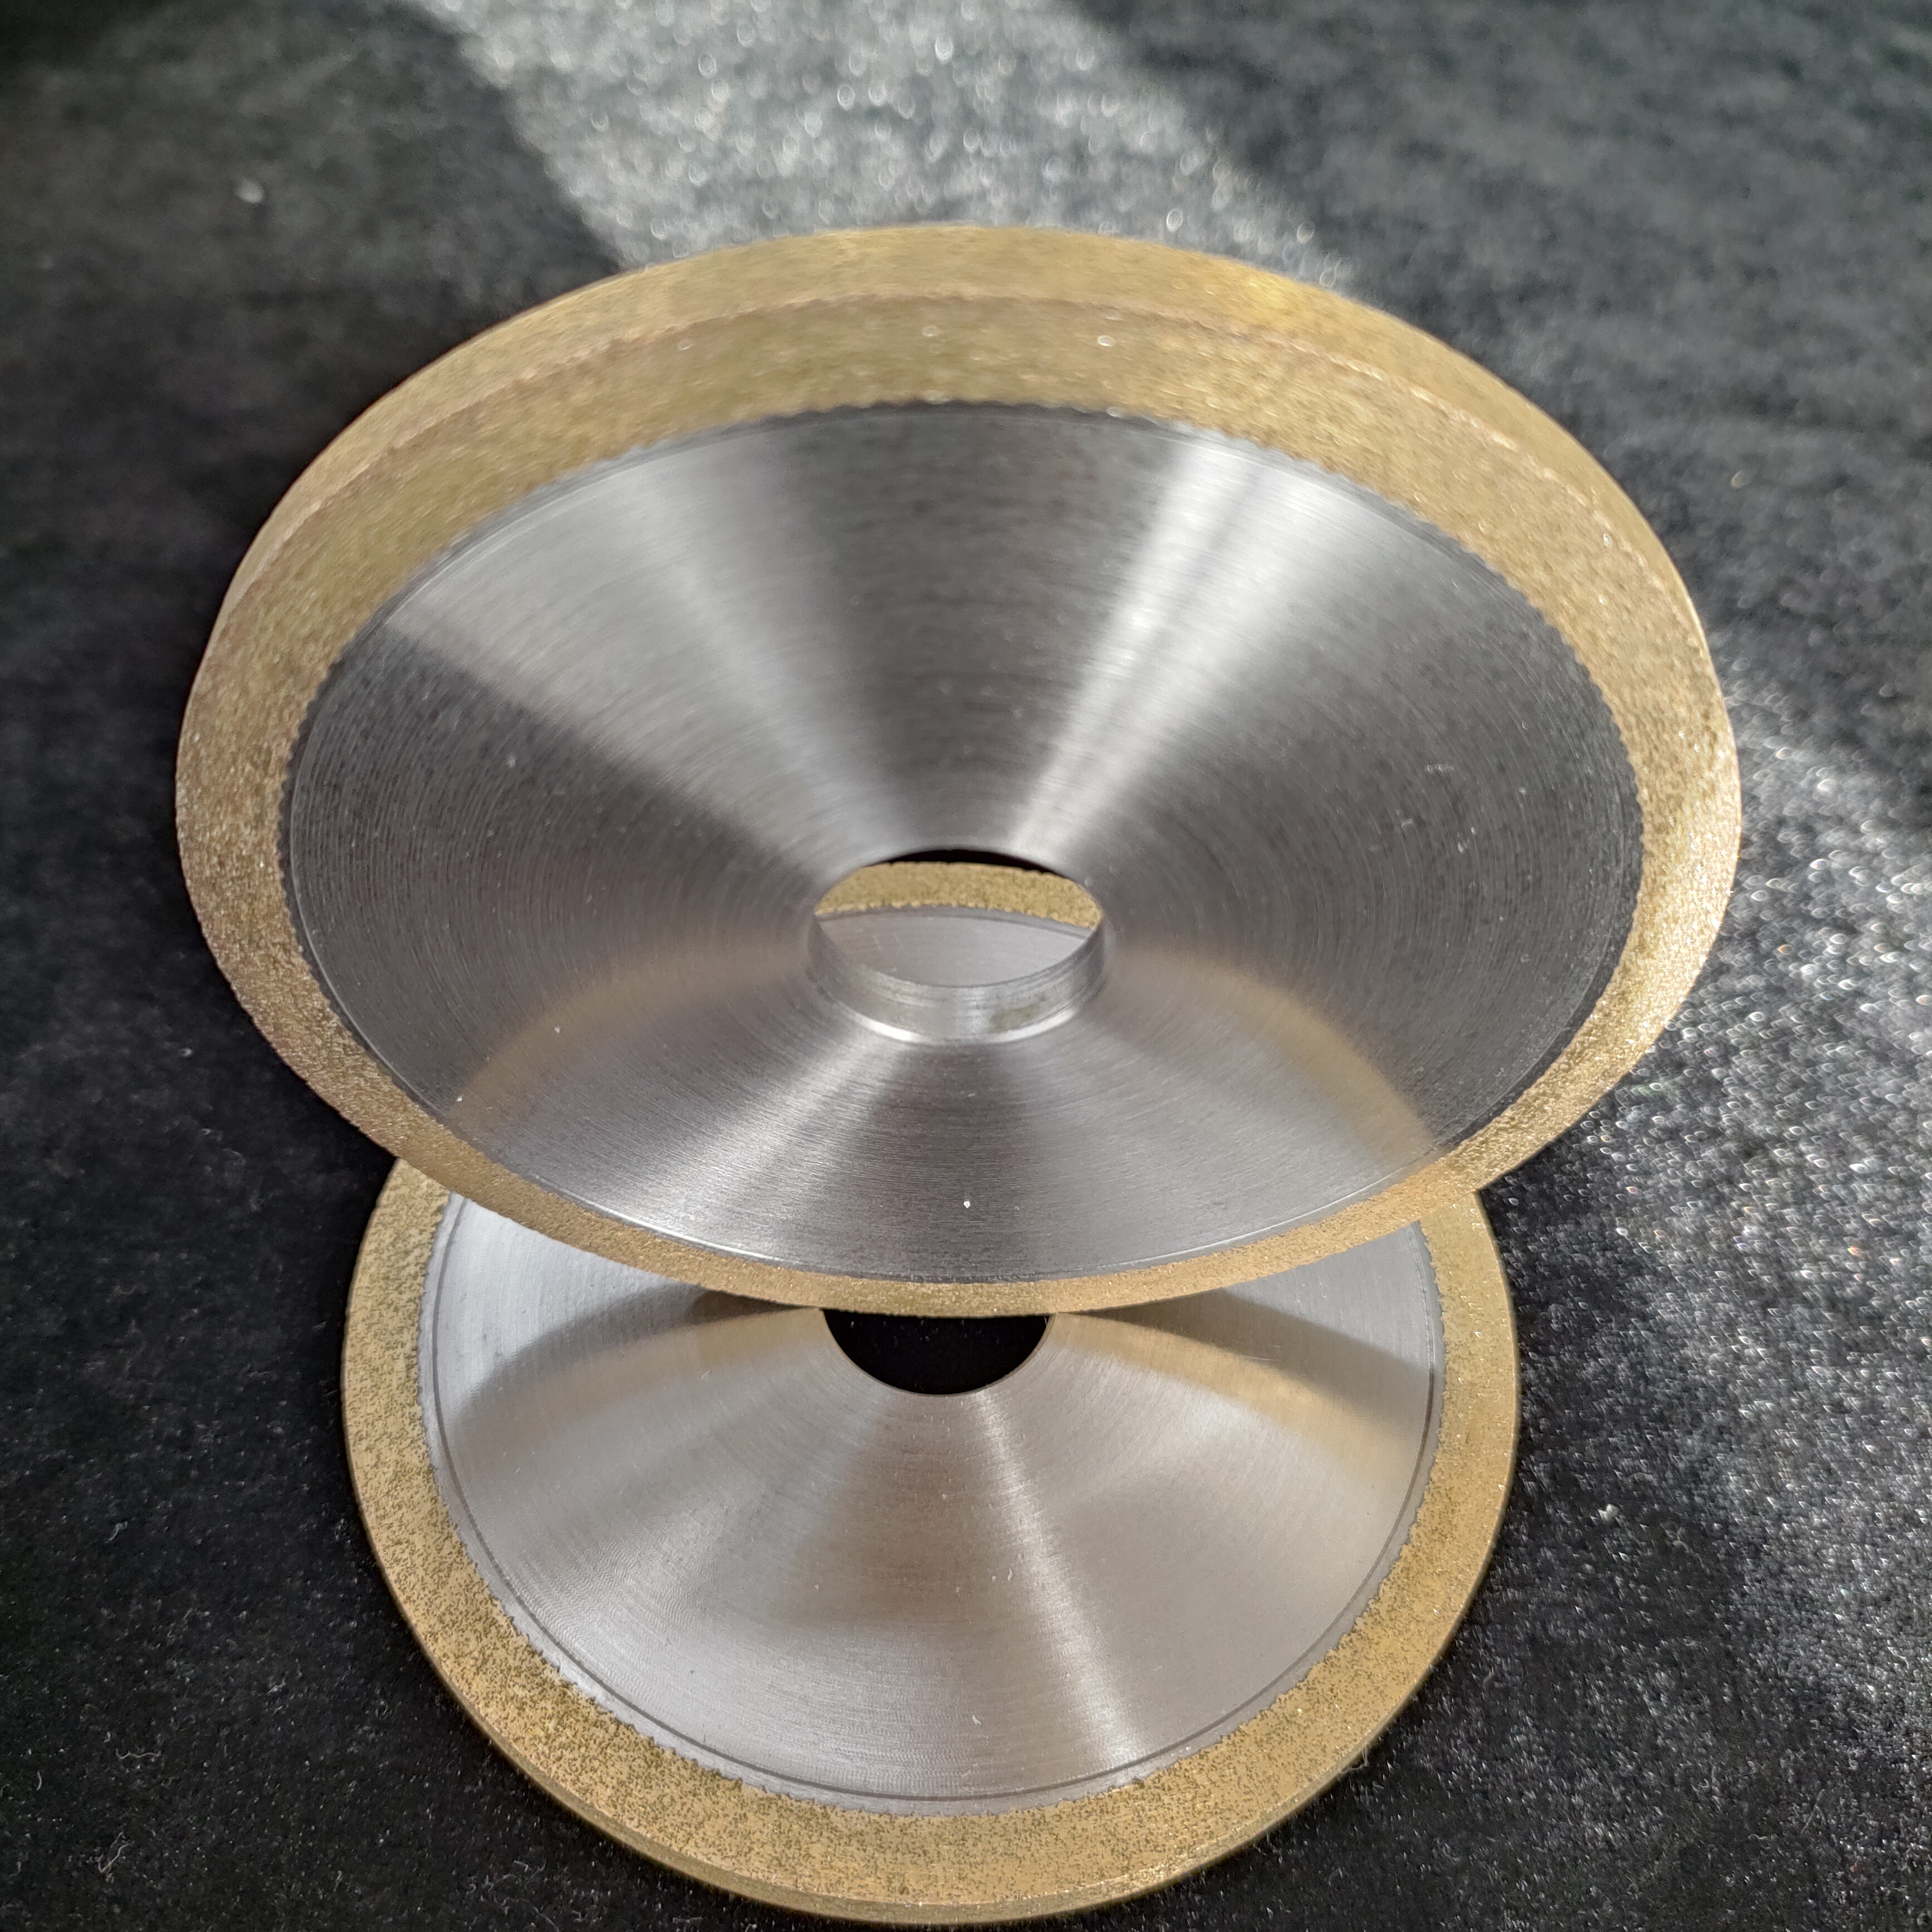 Glass Grinding Wheel Featured Image